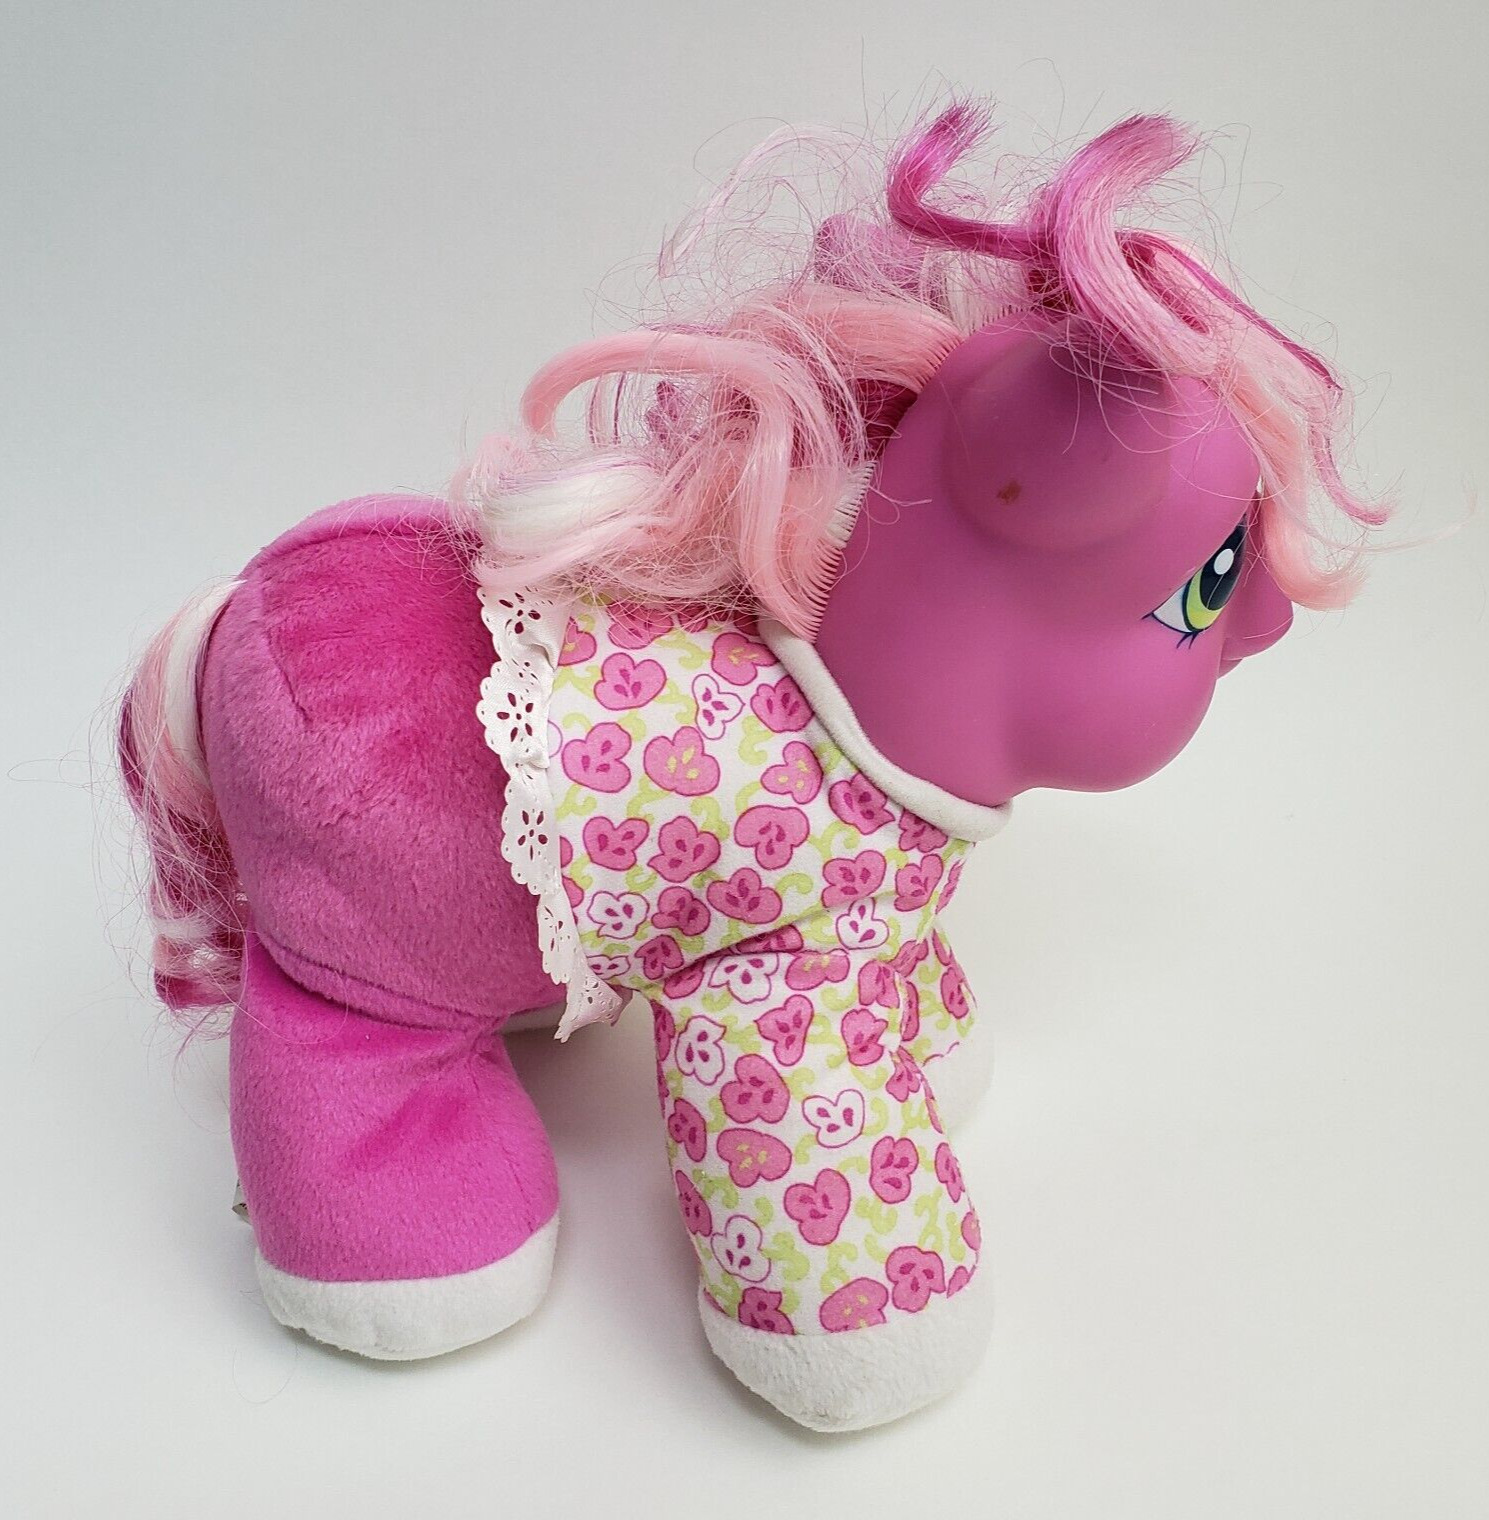 My Little Pony Pretty Powder Hasbro 2003 Hear Her Giggle Drinking Sounds Works